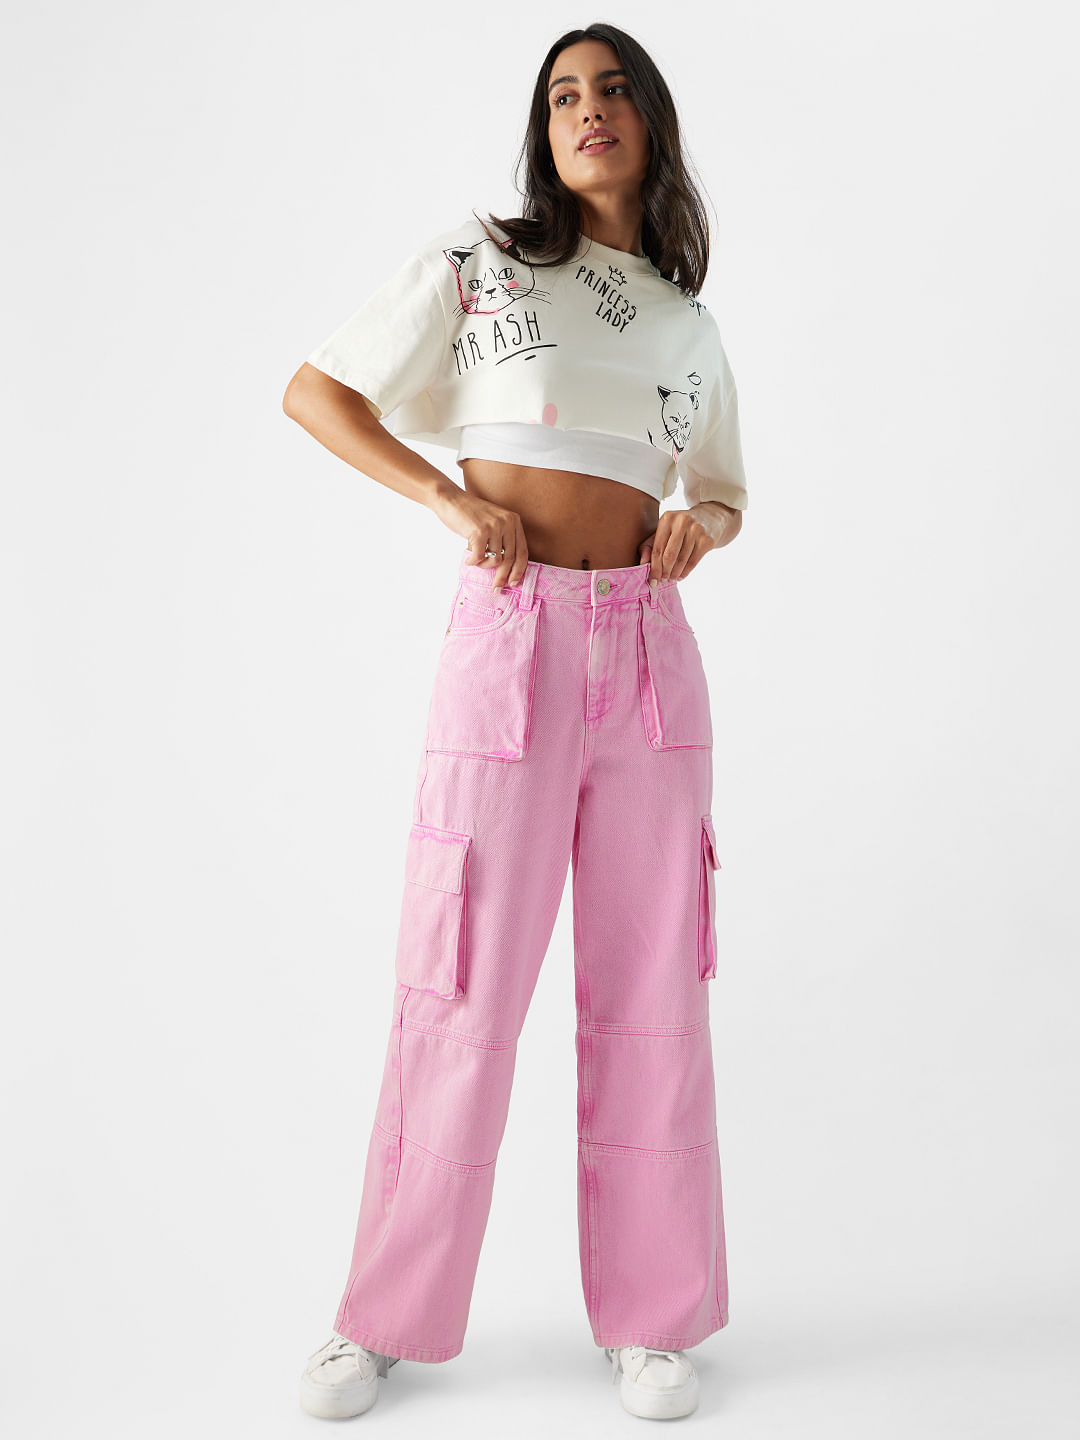 Buy Solids: Sangria Pink (Wide leg fit) Womens Jeans Online.